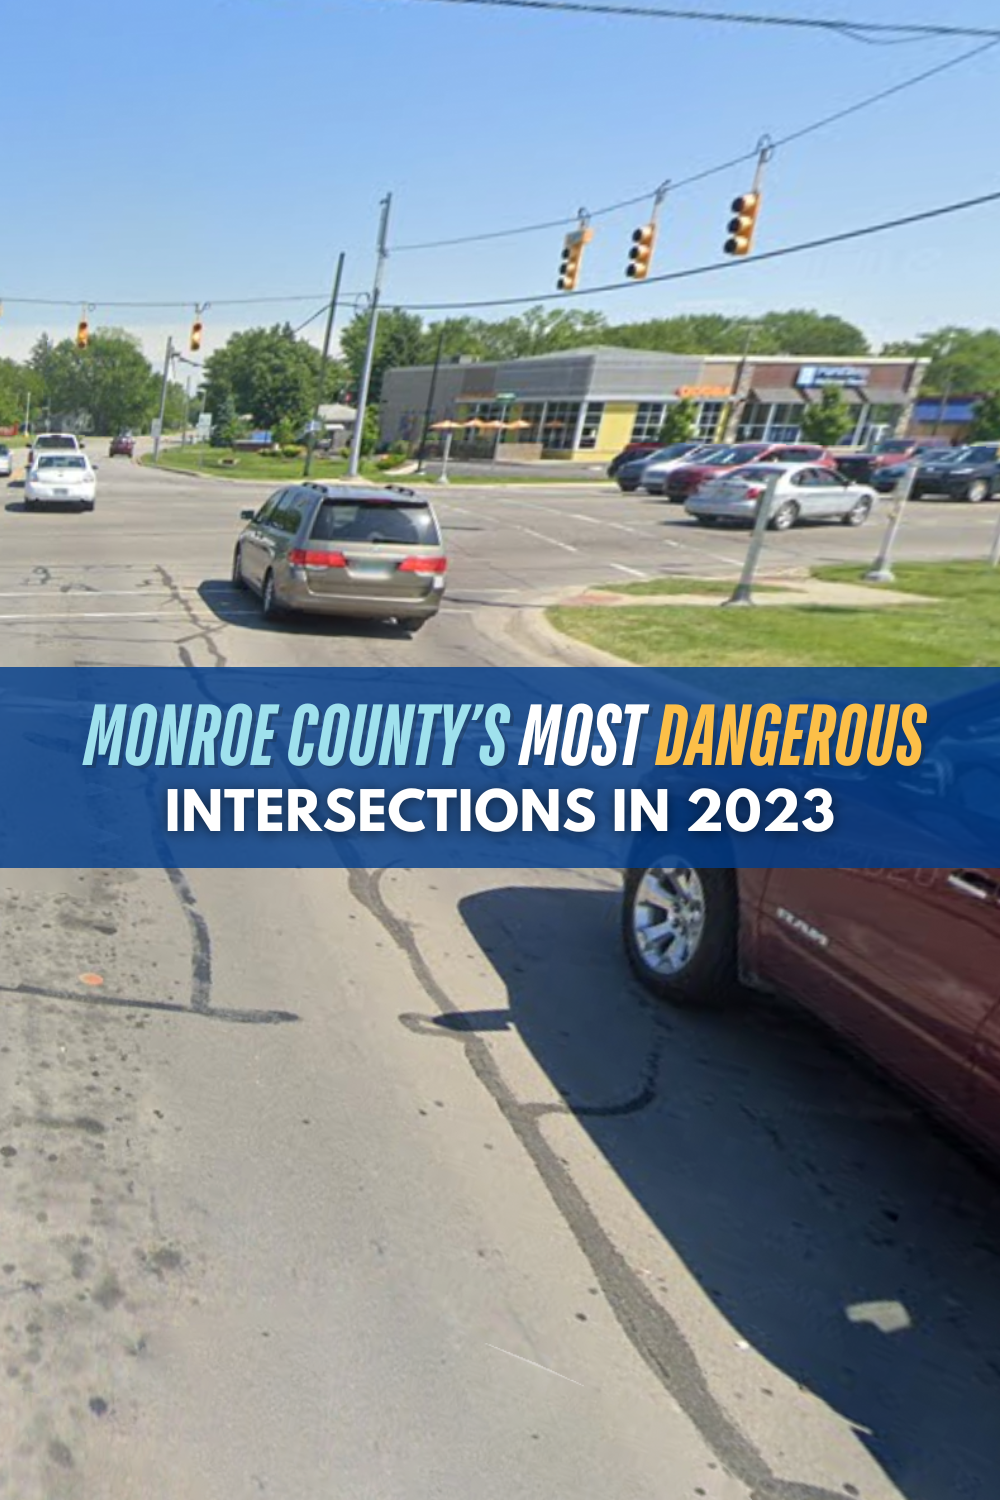 Monroe County’s Most Dangerous Intersections in 2023